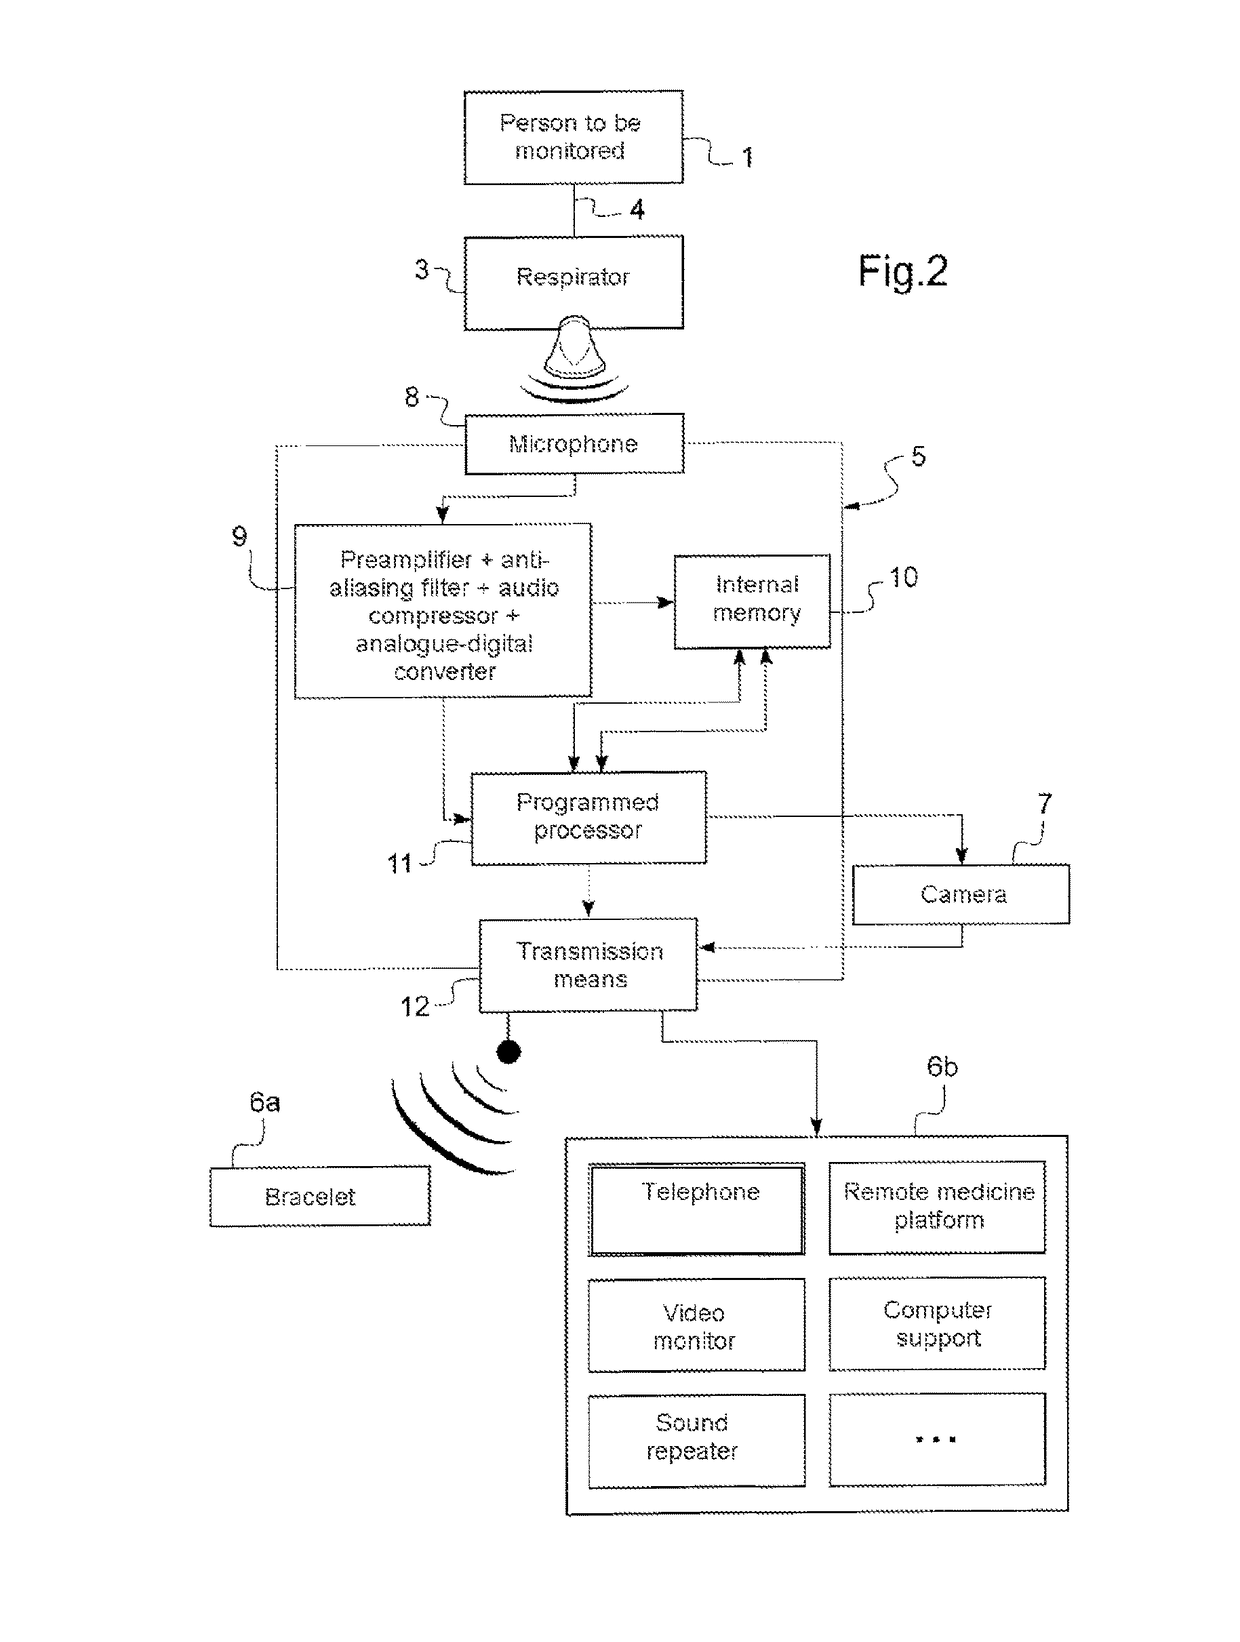 Assistance terminal for remotely monitoring a person connected to a medical assistance and monitoring device